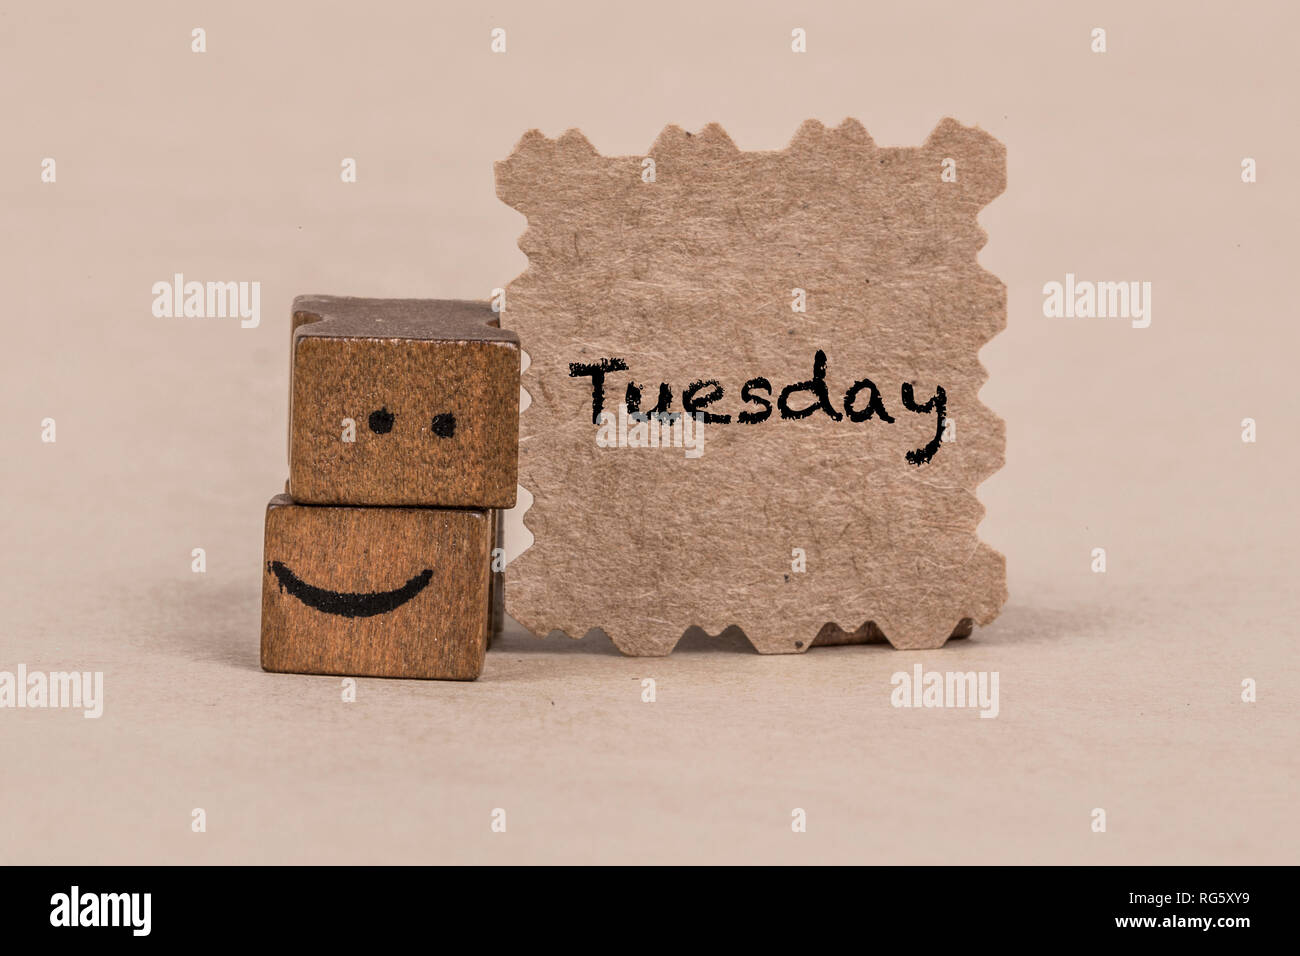 template for tuesday with smiley face icon Stock Photo